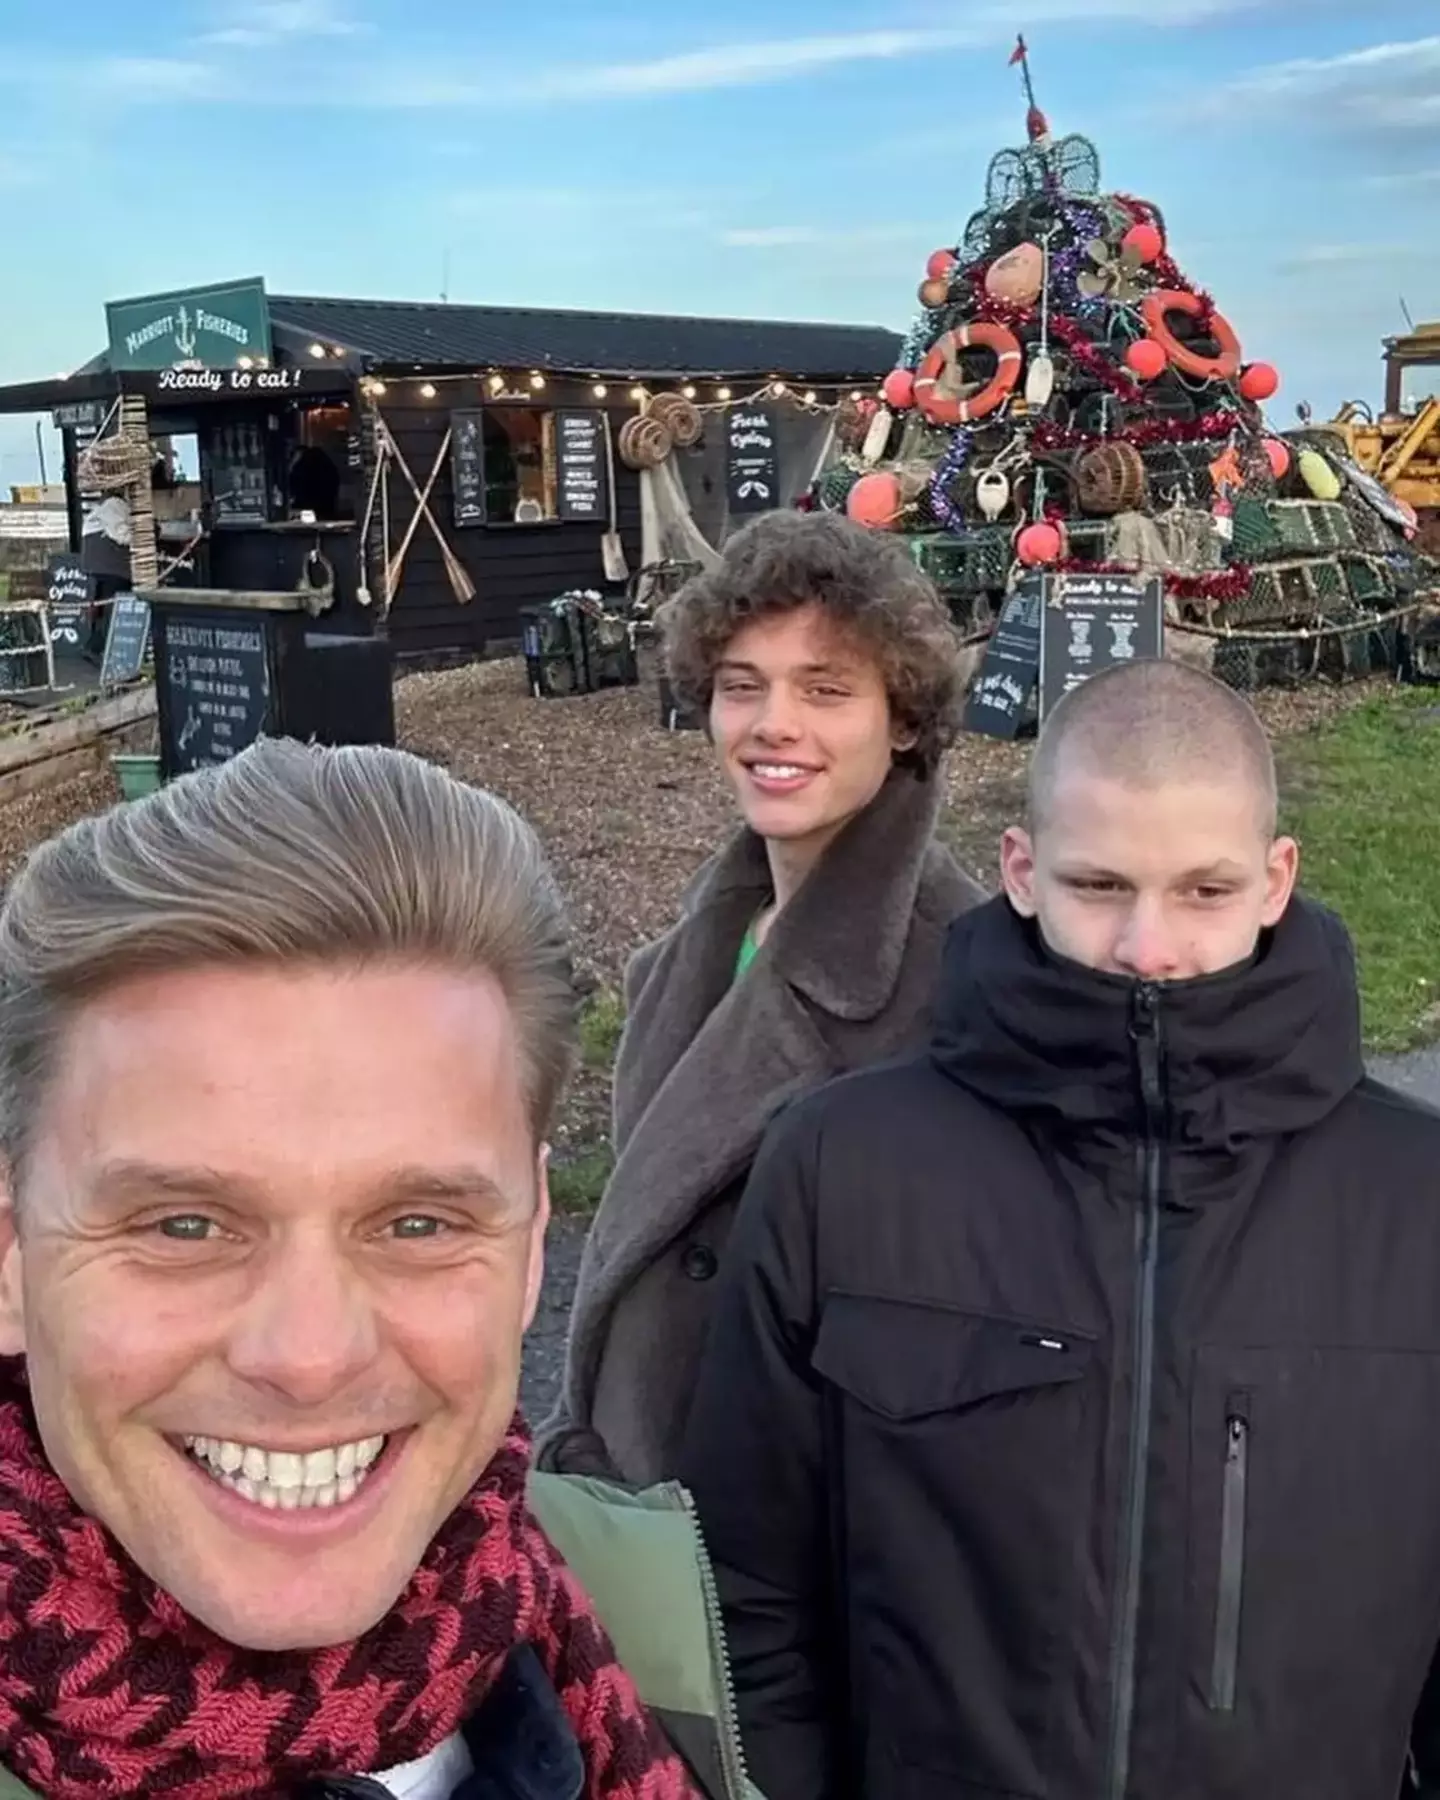 Jeff Brazier charges his sons rent.